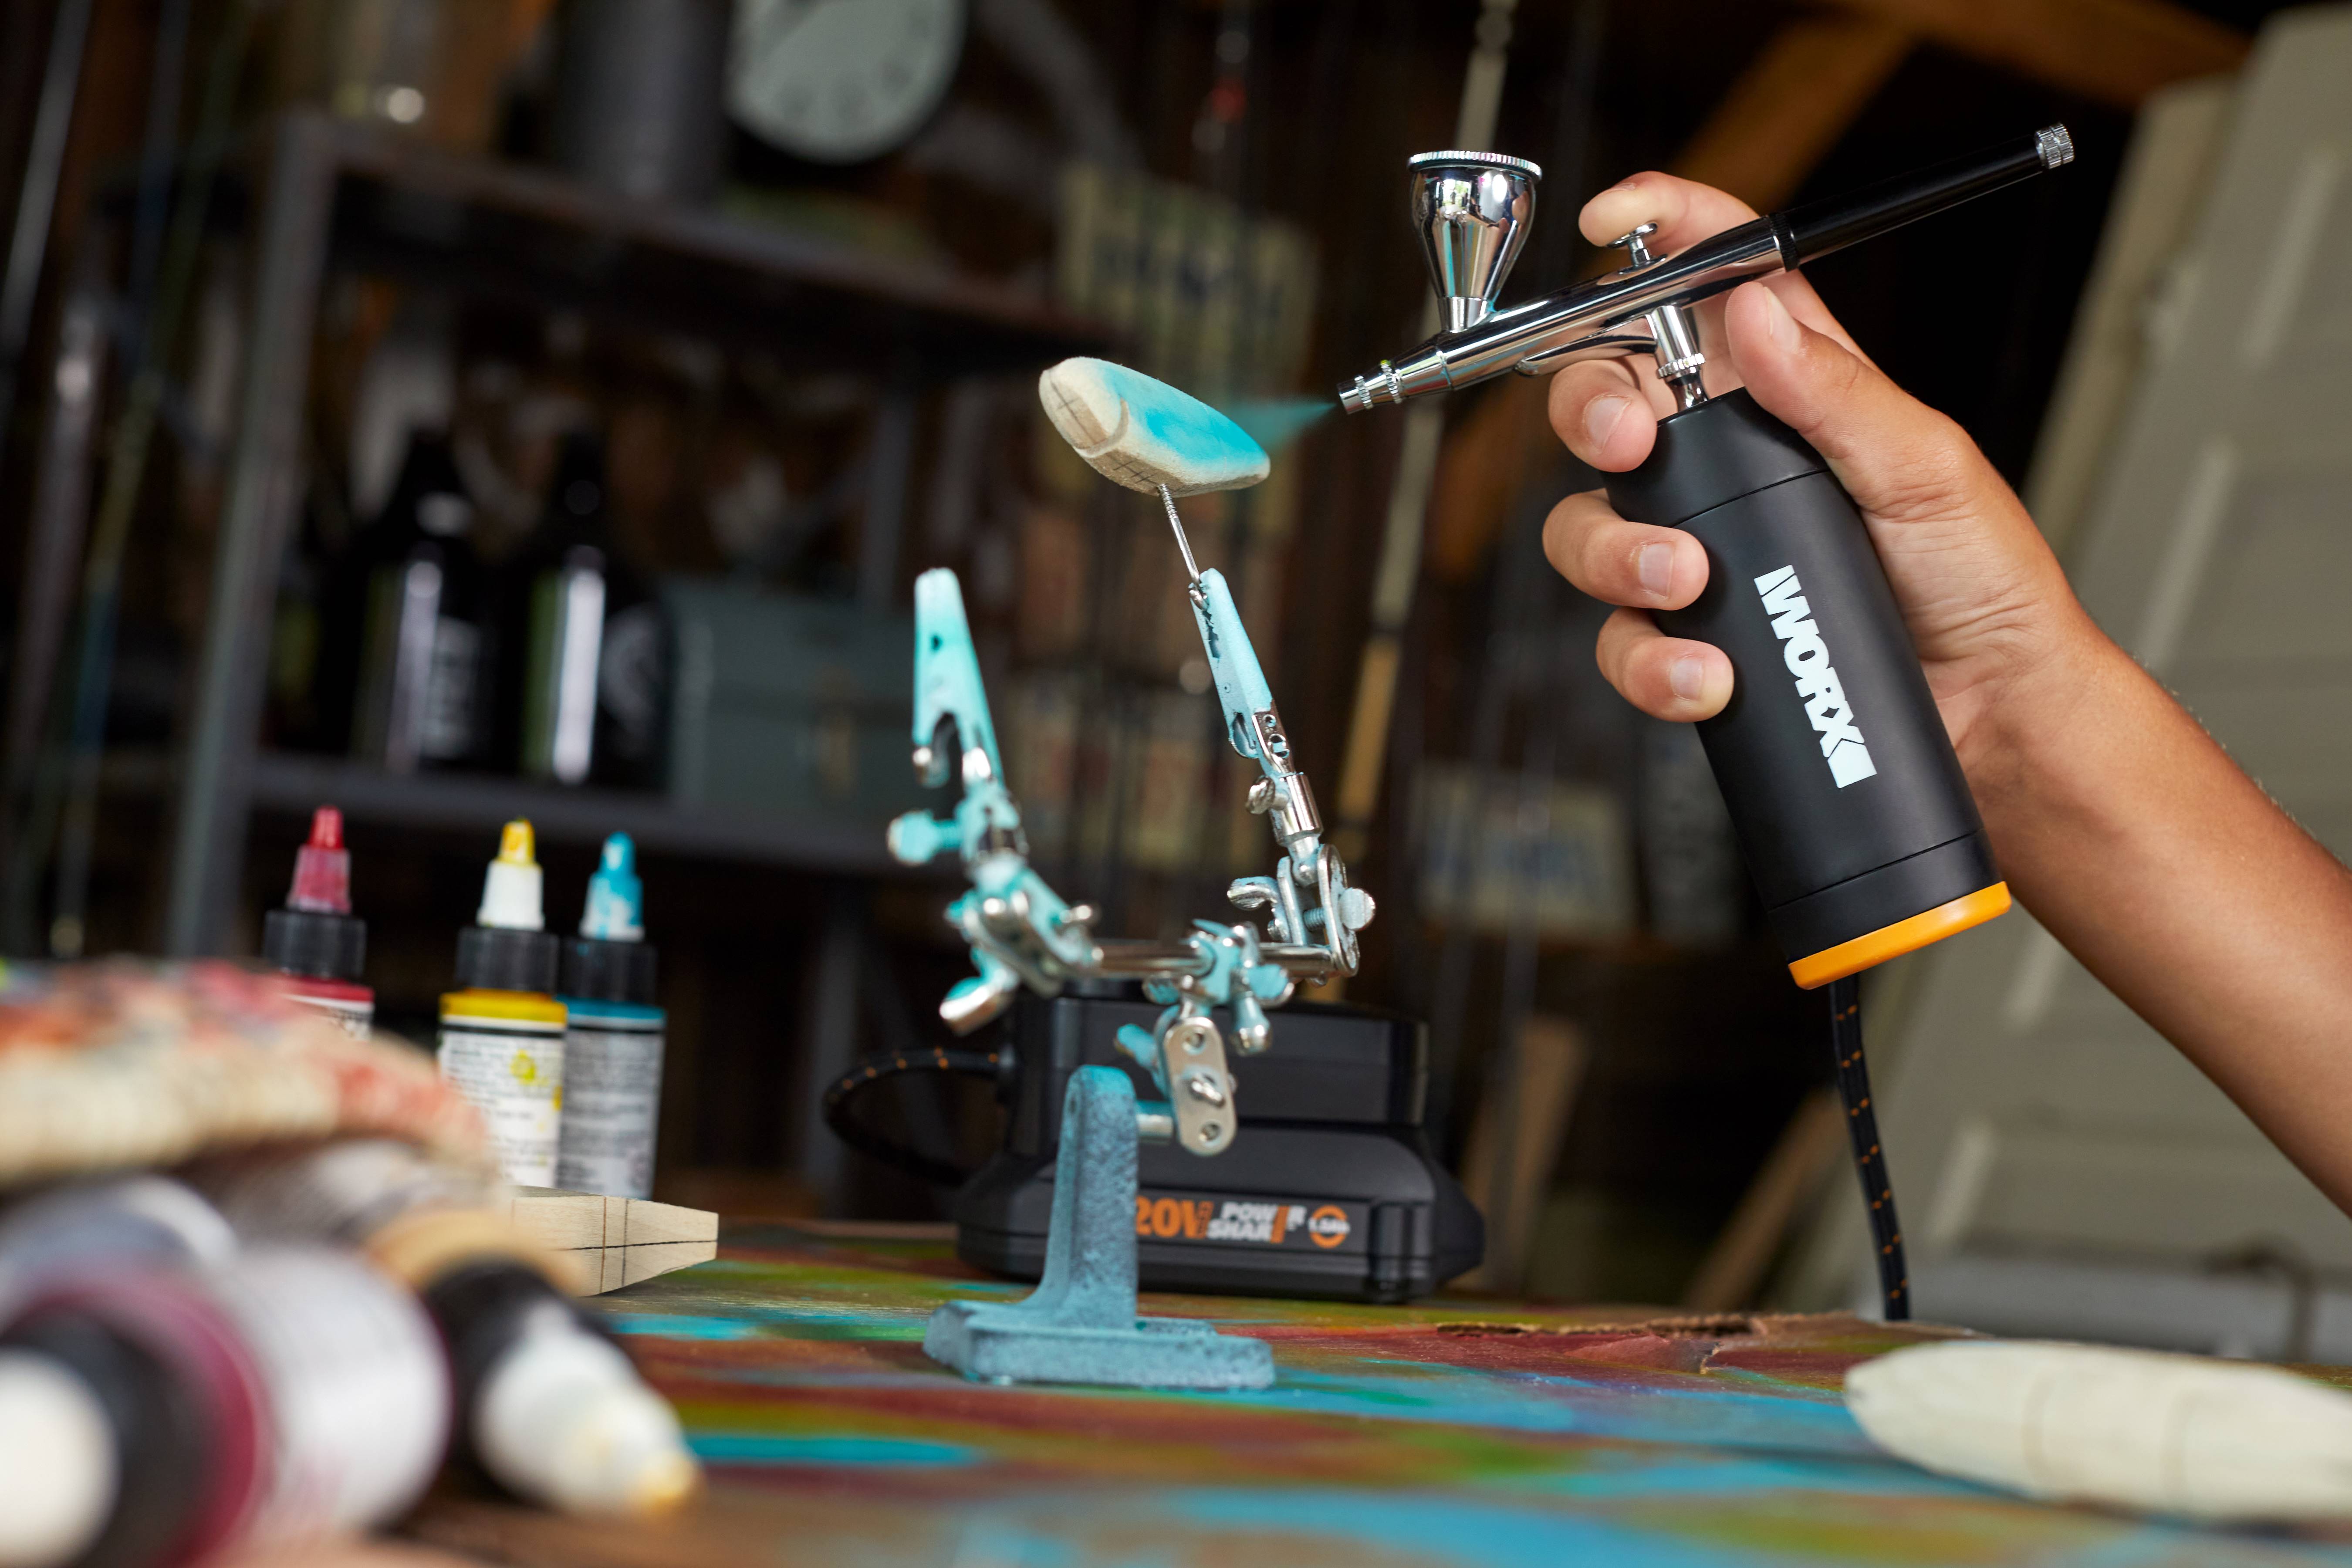 MakerX Air Brush is the only 20V airbrush on the market today.